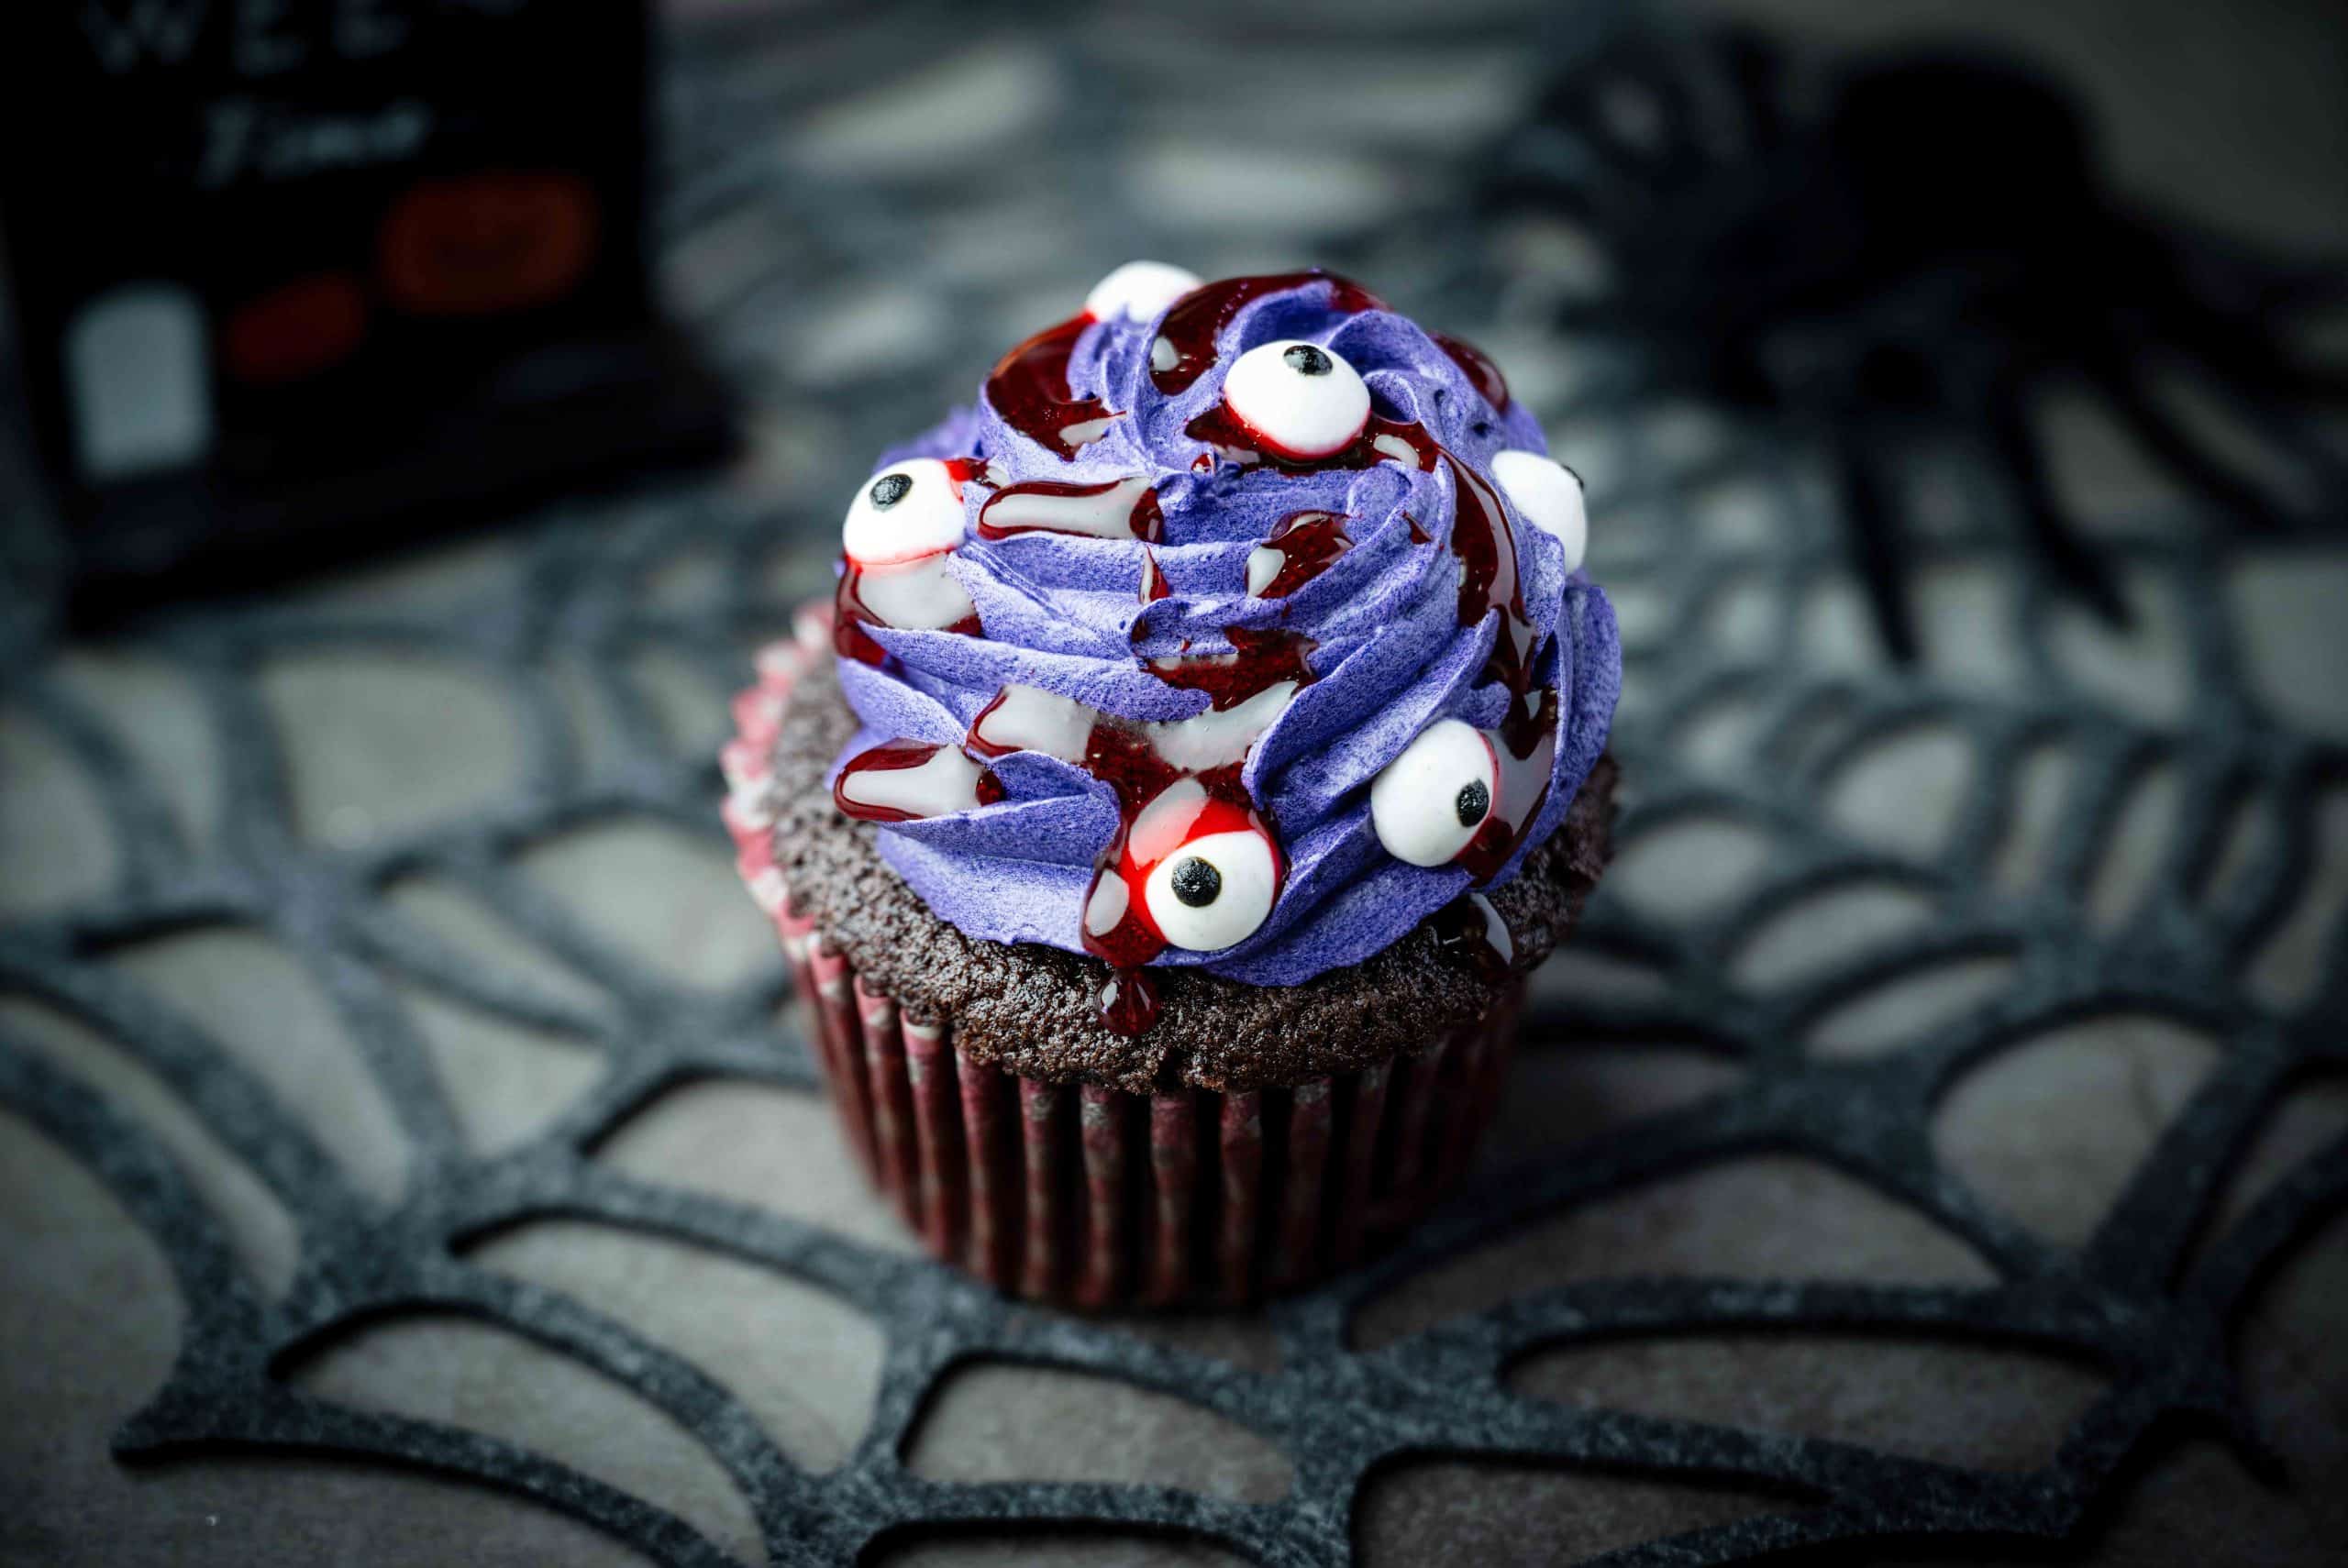 Get Ready to Sink Your Teeth into Our Creepy and Delicious Creations!